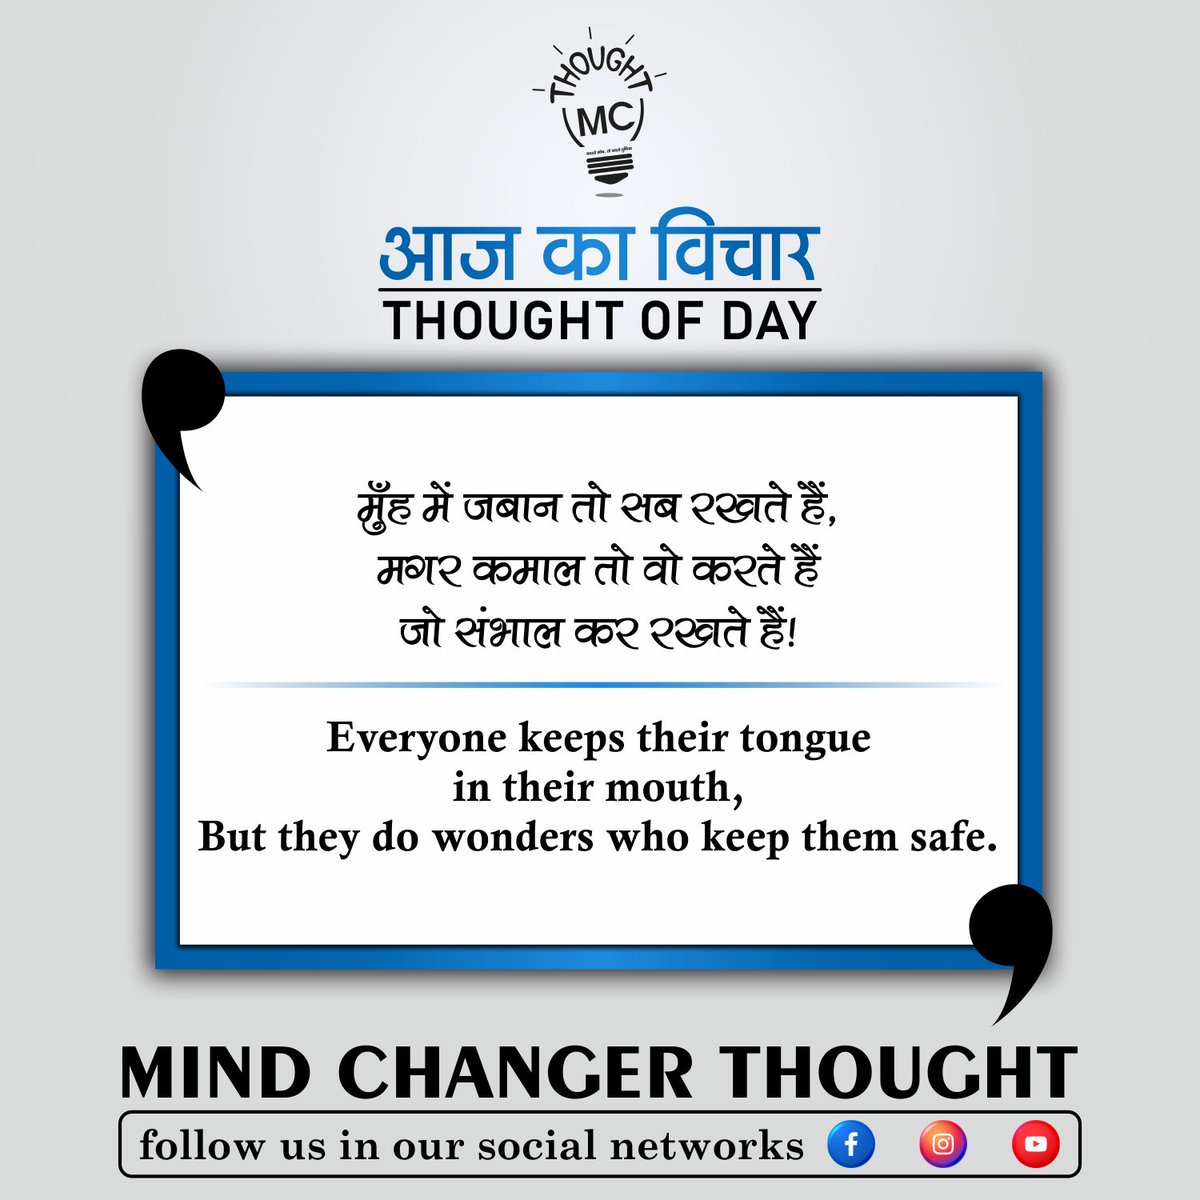 In this #motivation about ‘Keep Safe’ ​#everyone #tongue #wonder #safe #diligence #success #thought #mindchangerthought